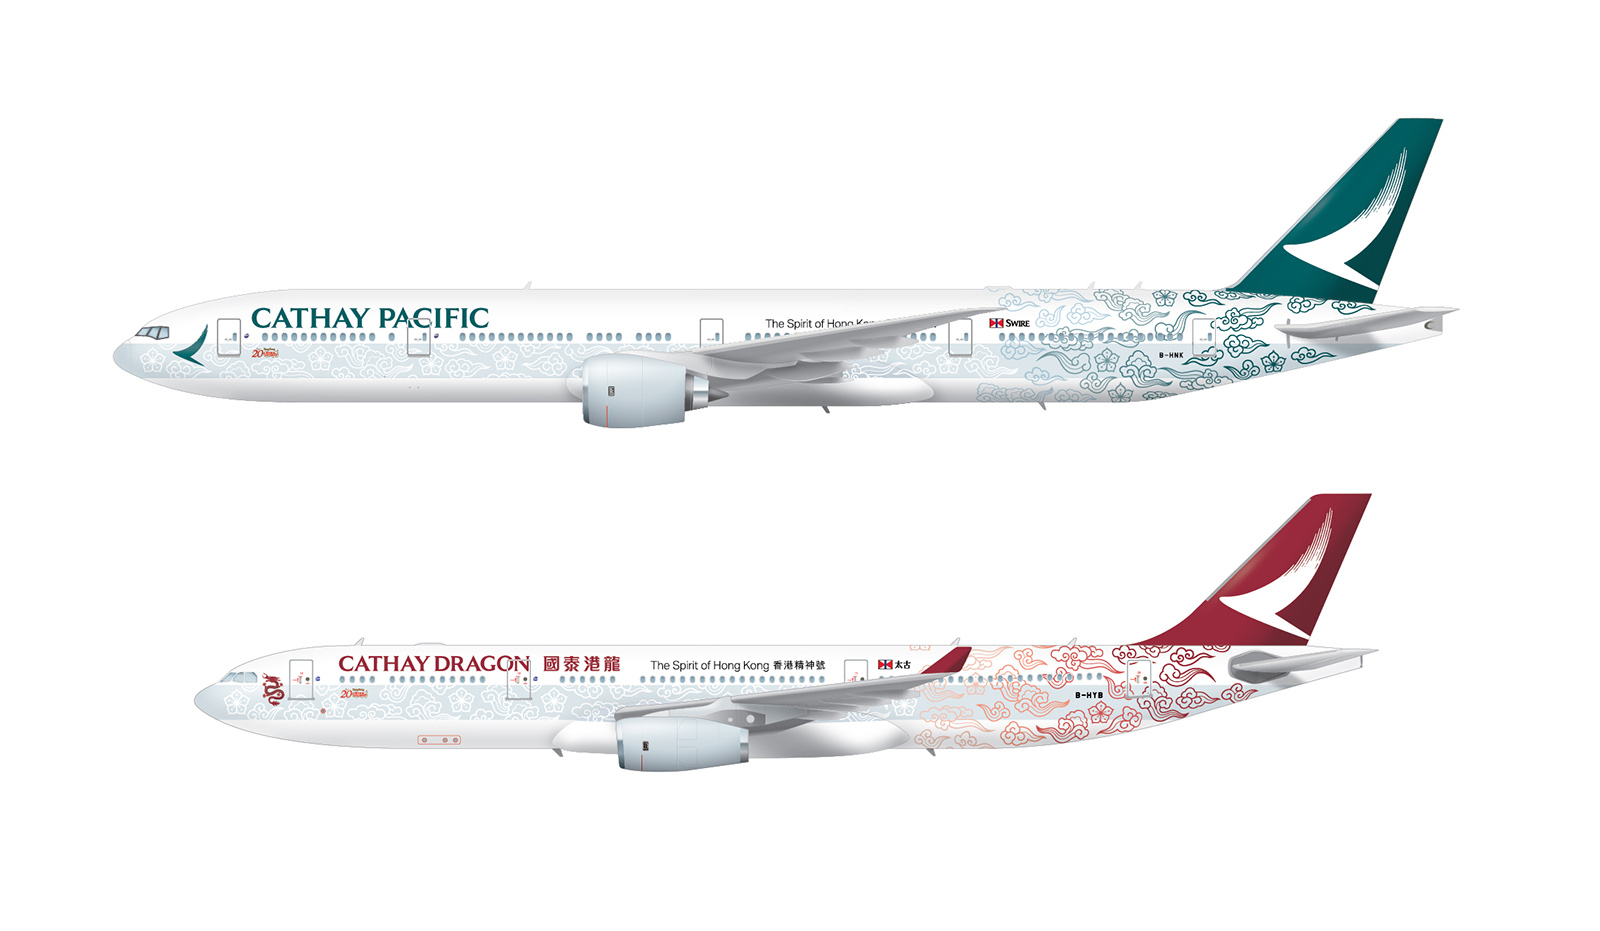 Cathay Pacific and Cathay Dragon livery CX 777-300